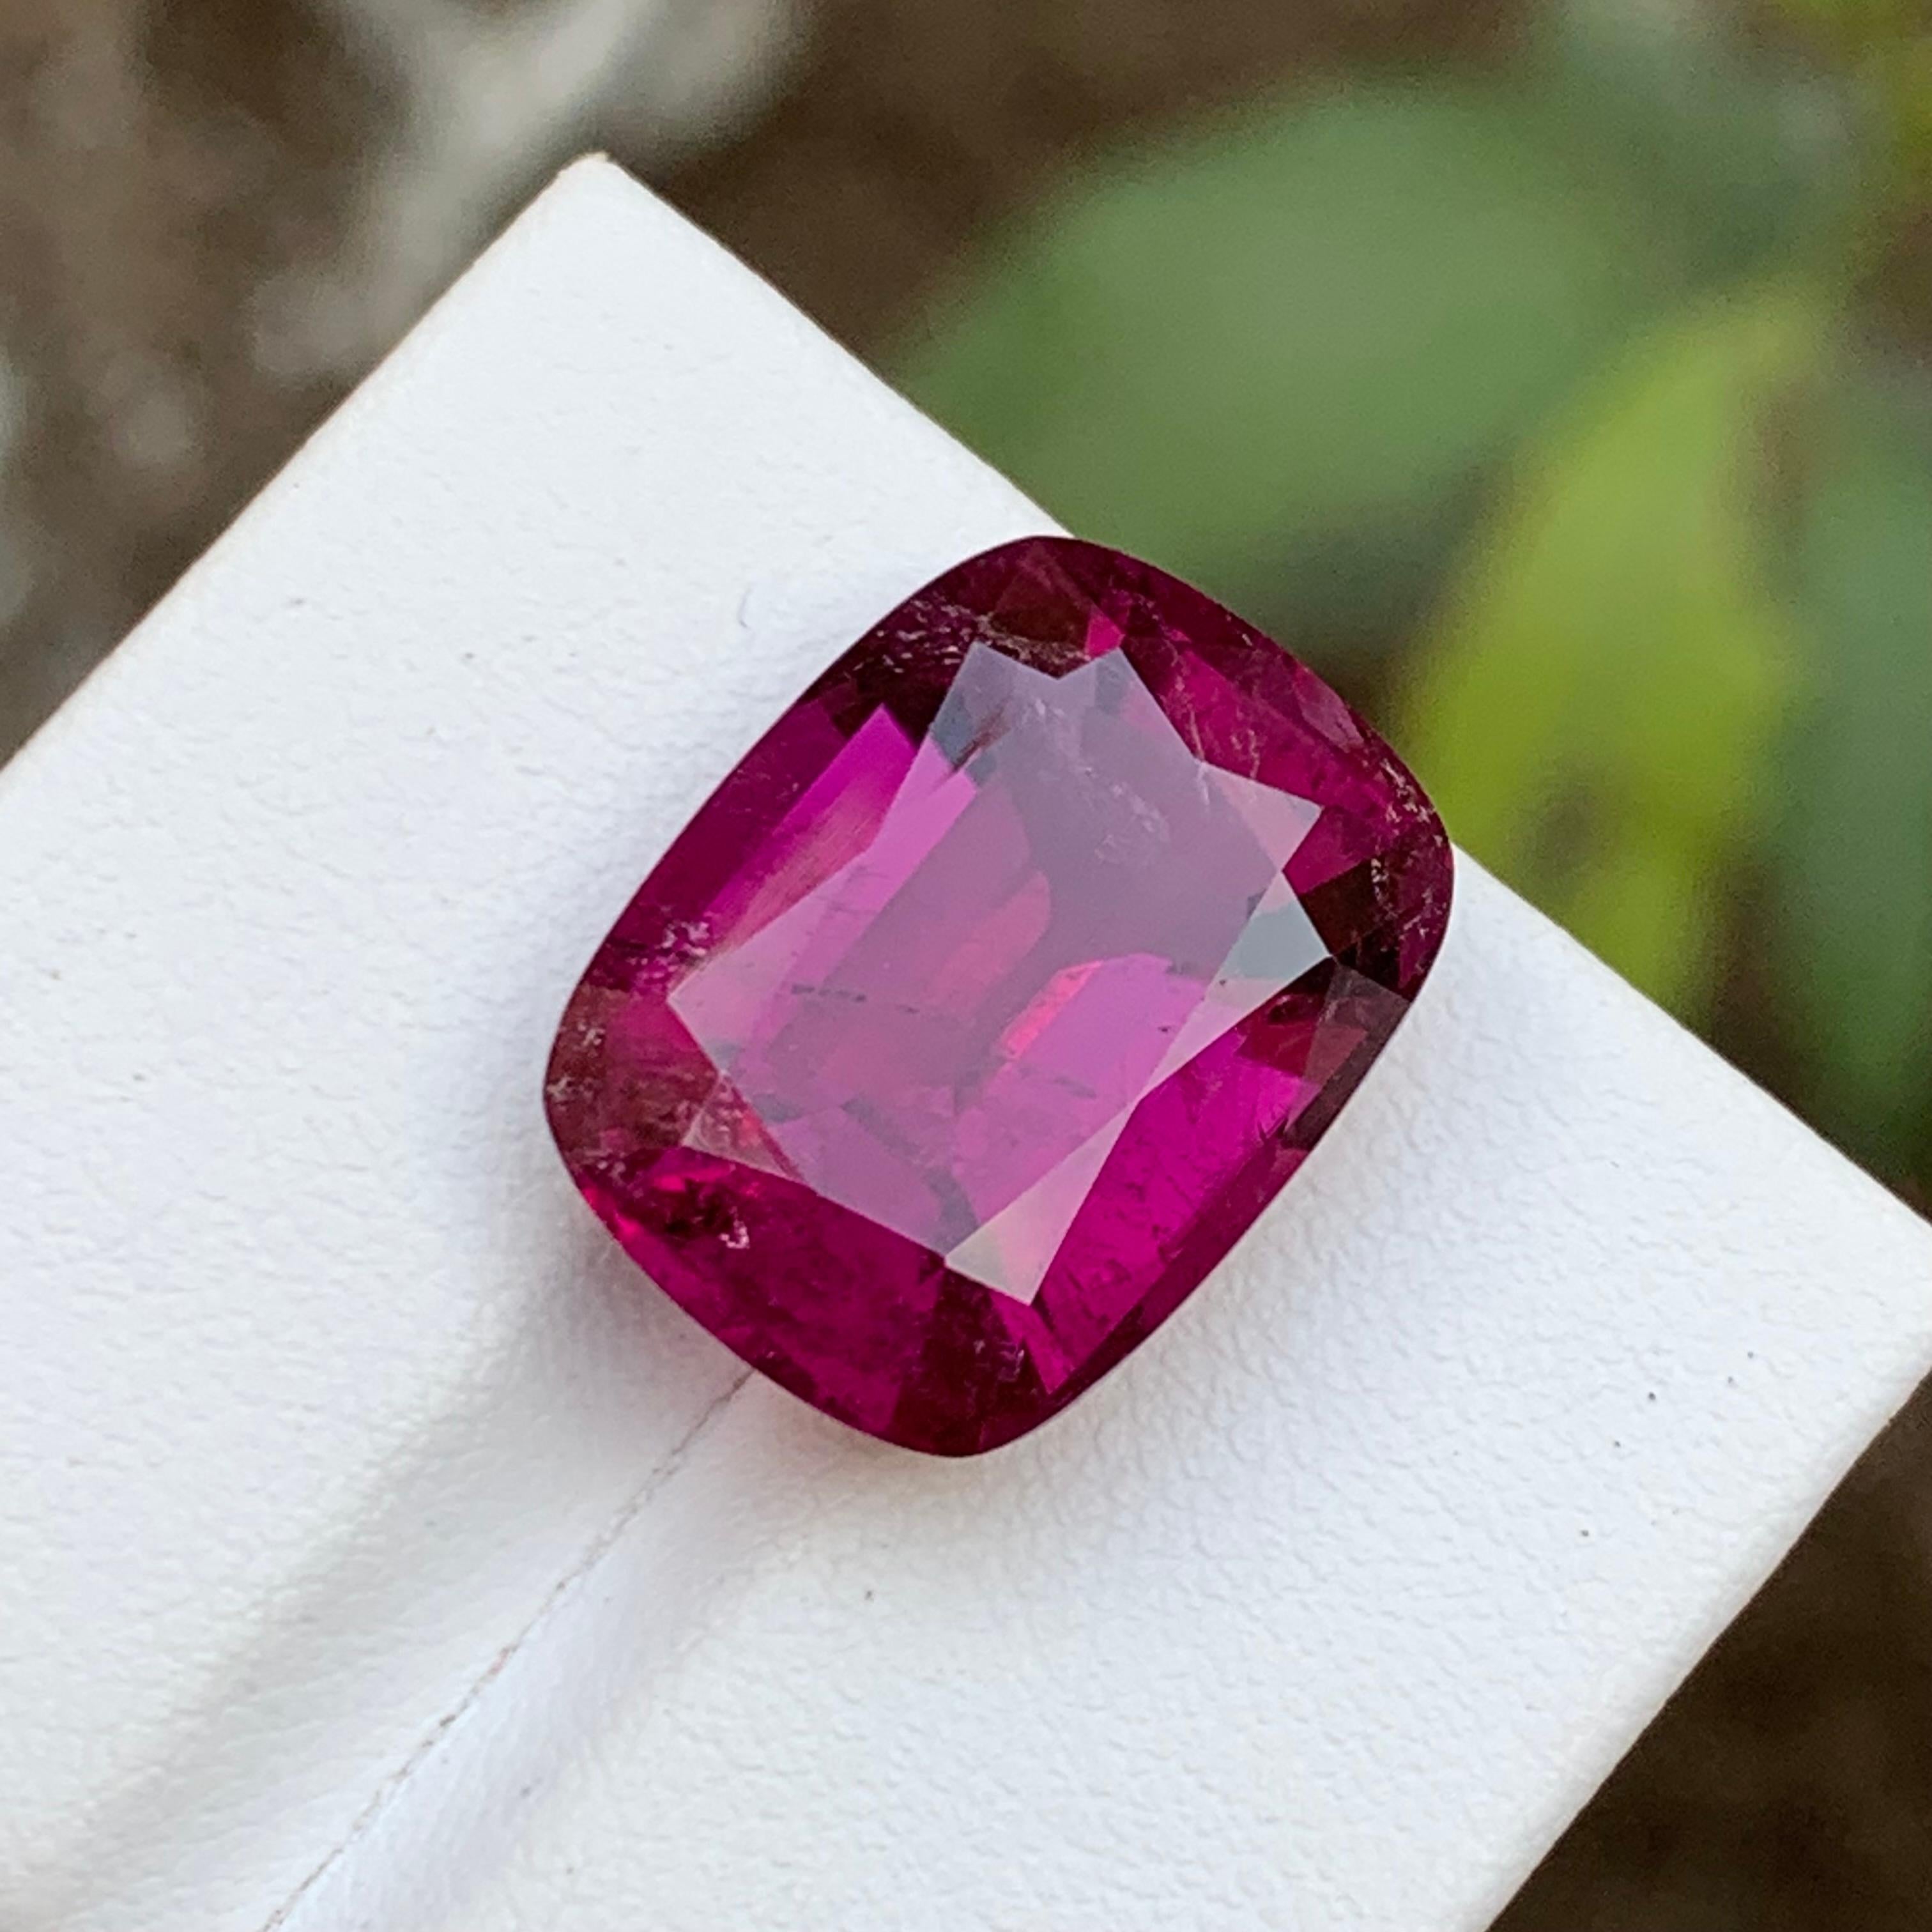 GEMSTONE TYPE: Rubellite Tourmaline
PIECE(S): 1
WEIGHT: 13.45 Carats
SHAPE: Cushion 
SIZE (MM): 17.06 x 13.07 x 8.24
COLOR: Purplish Pink
CLARITY: Moderately Included 
TREATMENT: Heated
ORIGIN: Afghanistan
CERTIFICATE: On demand

Introducing our